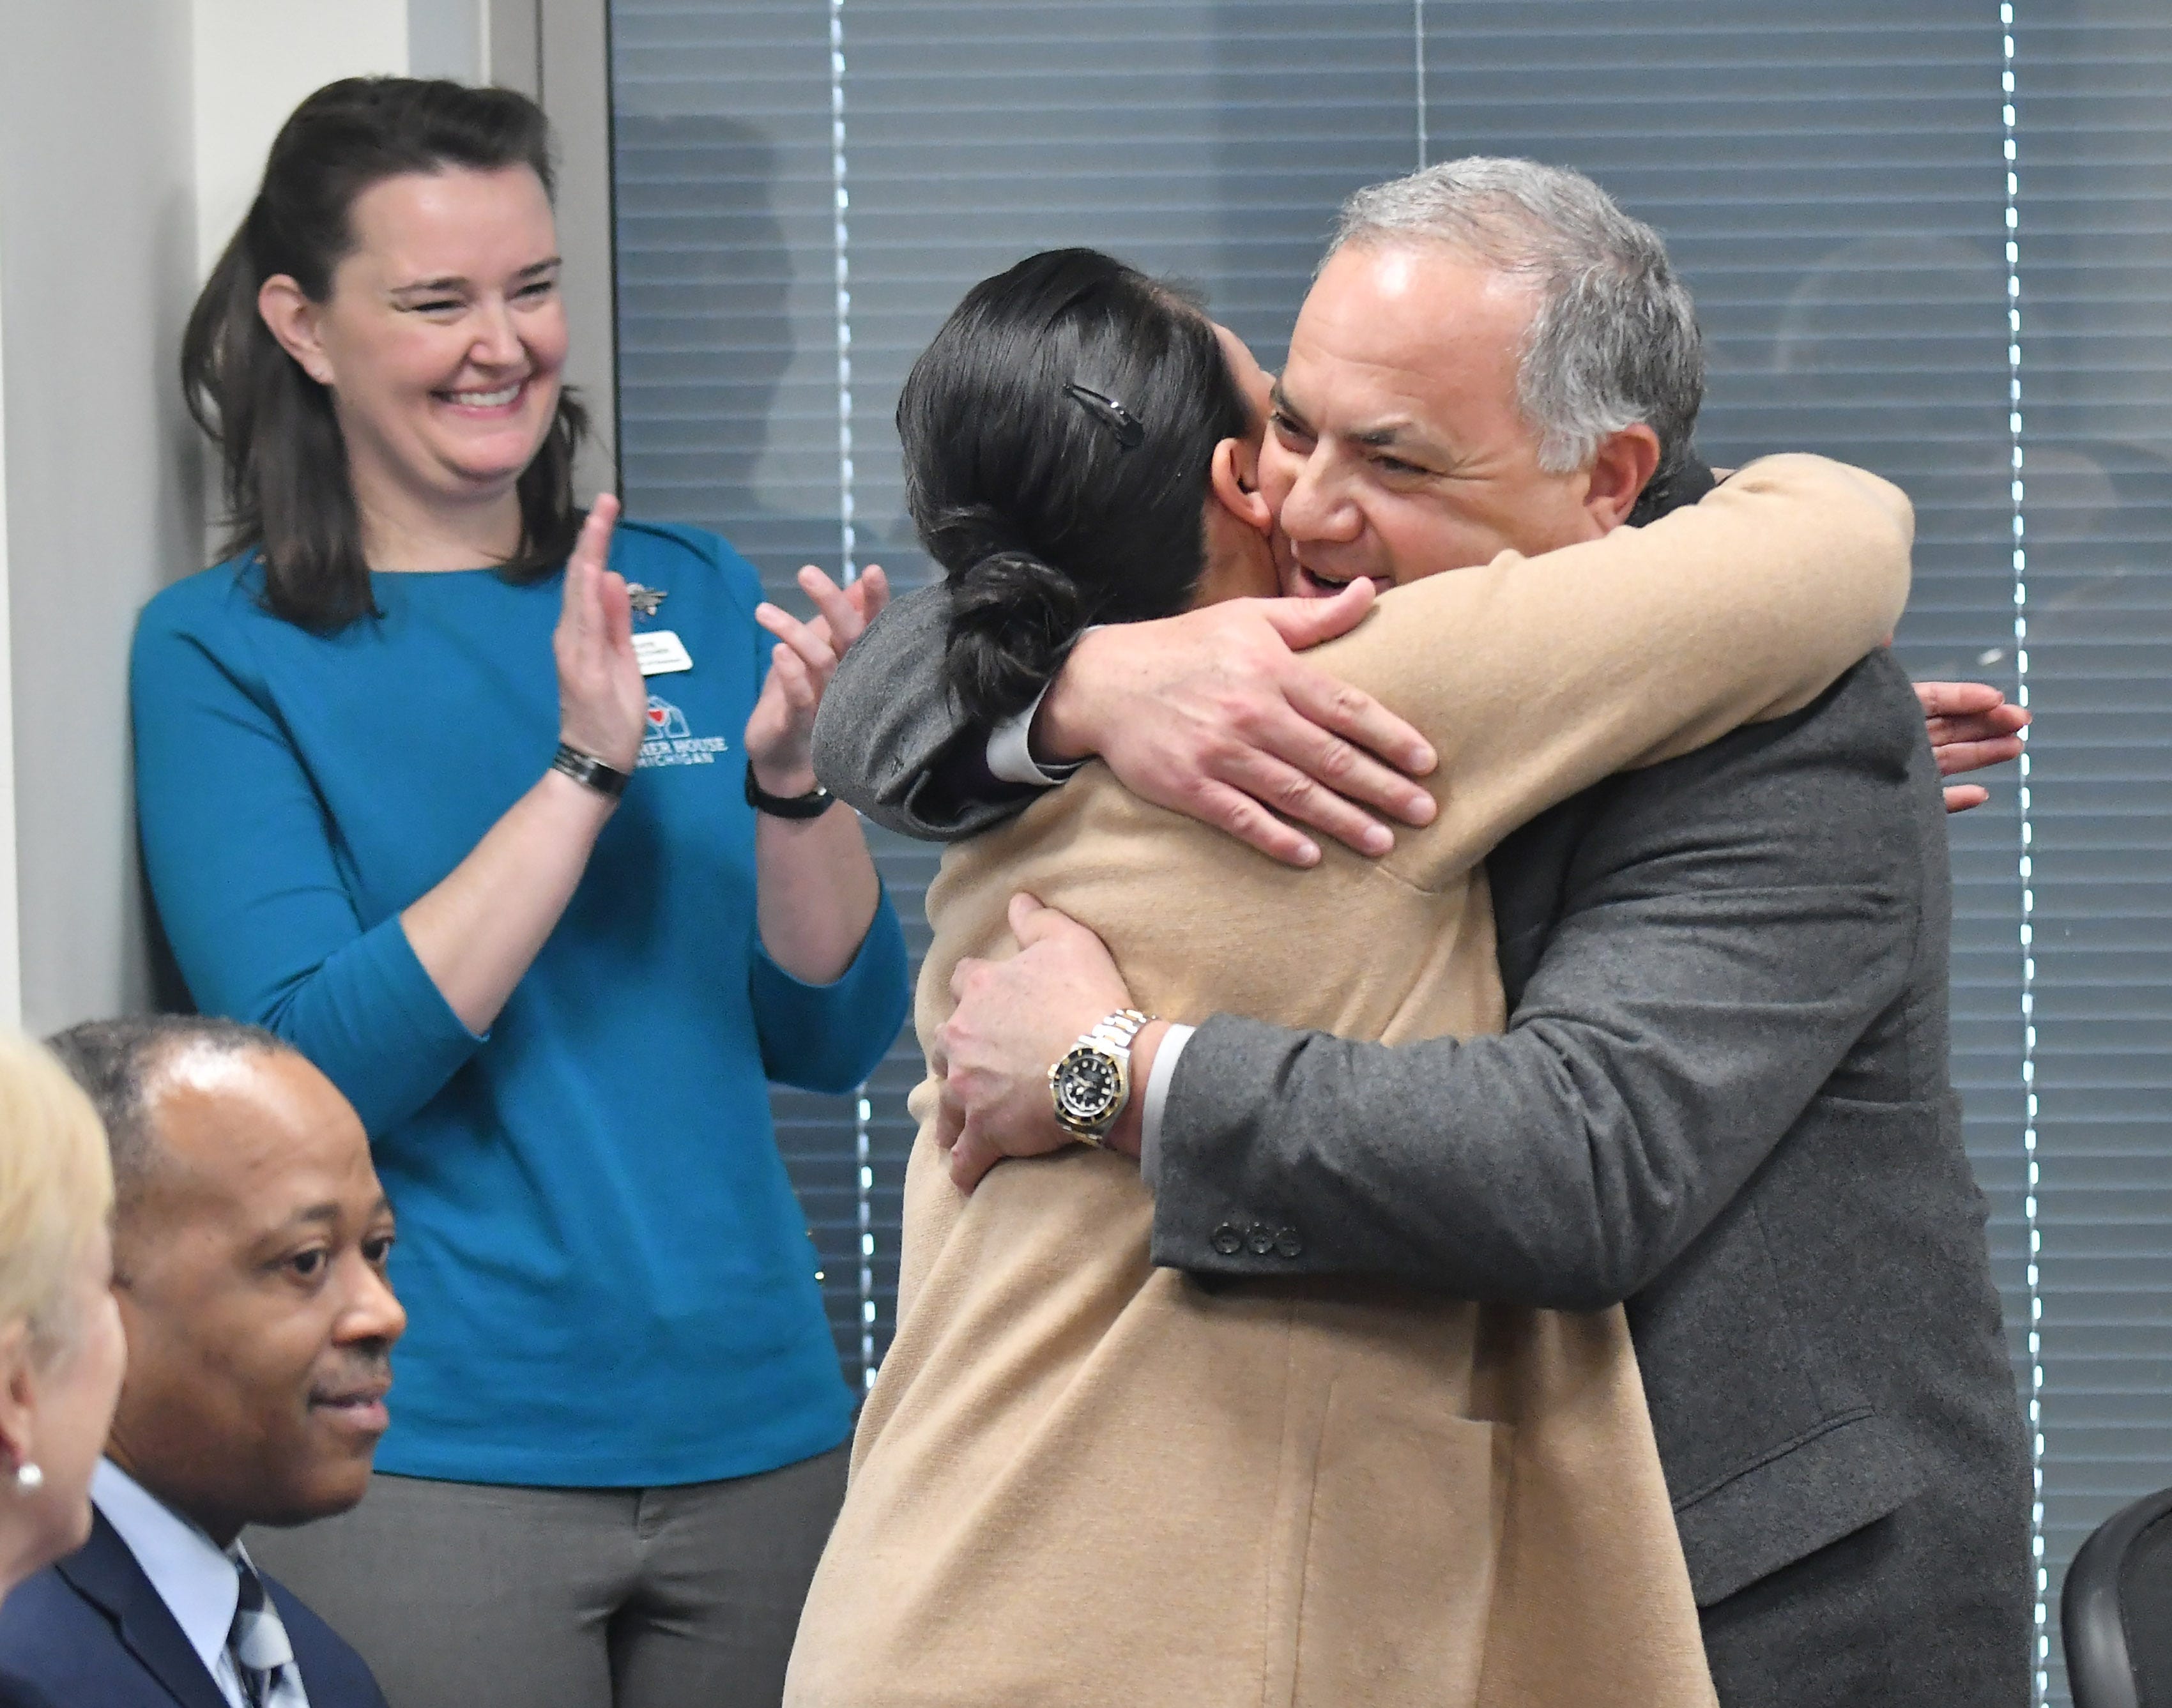 Tigers executive vice president of baseball operations and general manager Al Avila hugs Dorothy Narvaez-Woods, whose husband was killed in the line of duty serving as a Navy Seal, during a stop on the 2019 Detroit Tigers Winter Caravan at the John D. Dingell VA Medical Center in Detroit on Jan. 24, 2019. Narvaez-Woods spoke at the event and also served in the Navy.